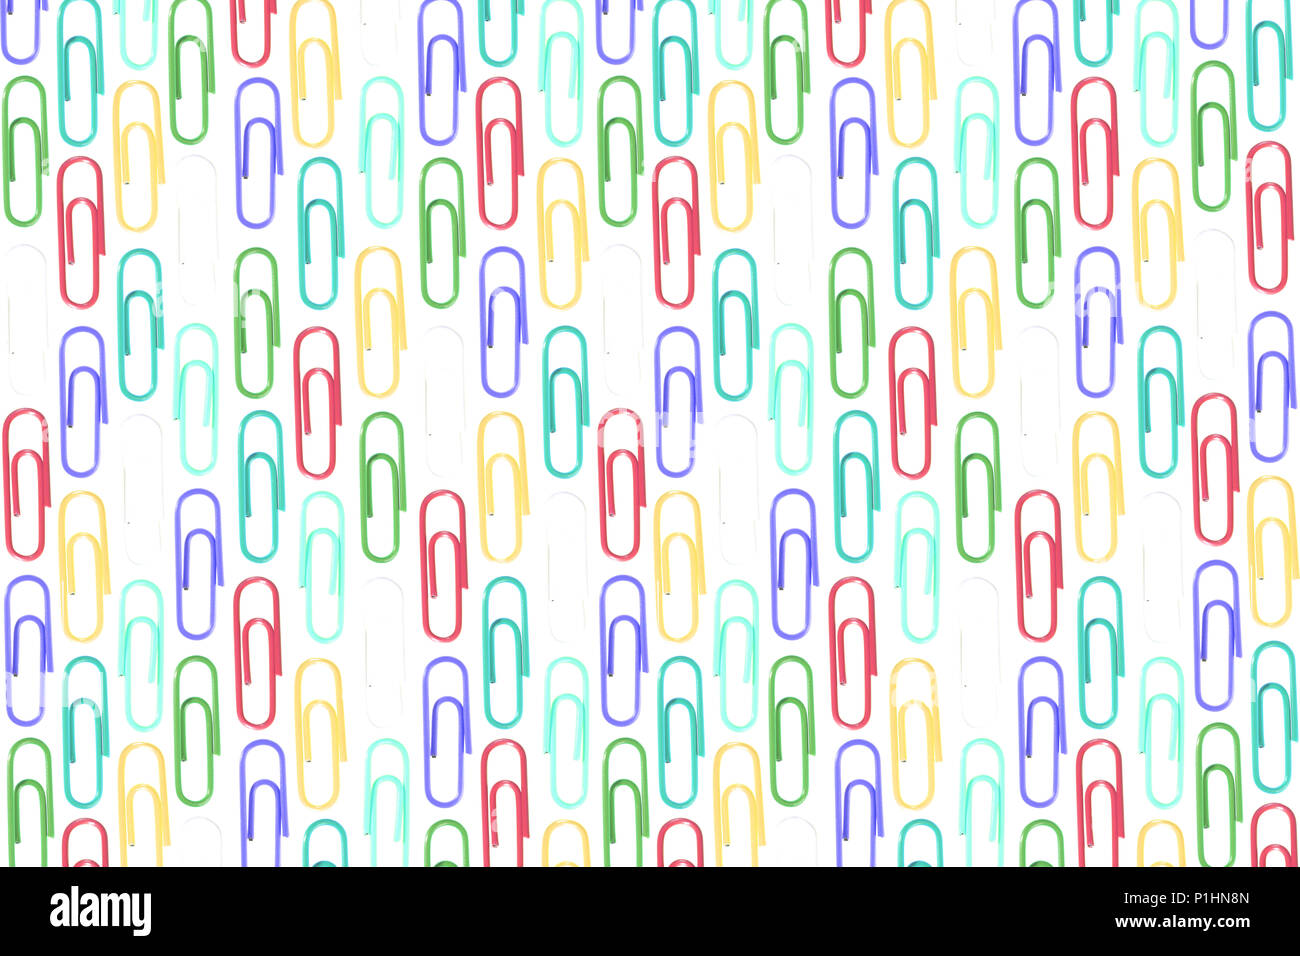 Paper Clips Pattern. Office Stationery Equipment Background. Stock Photo